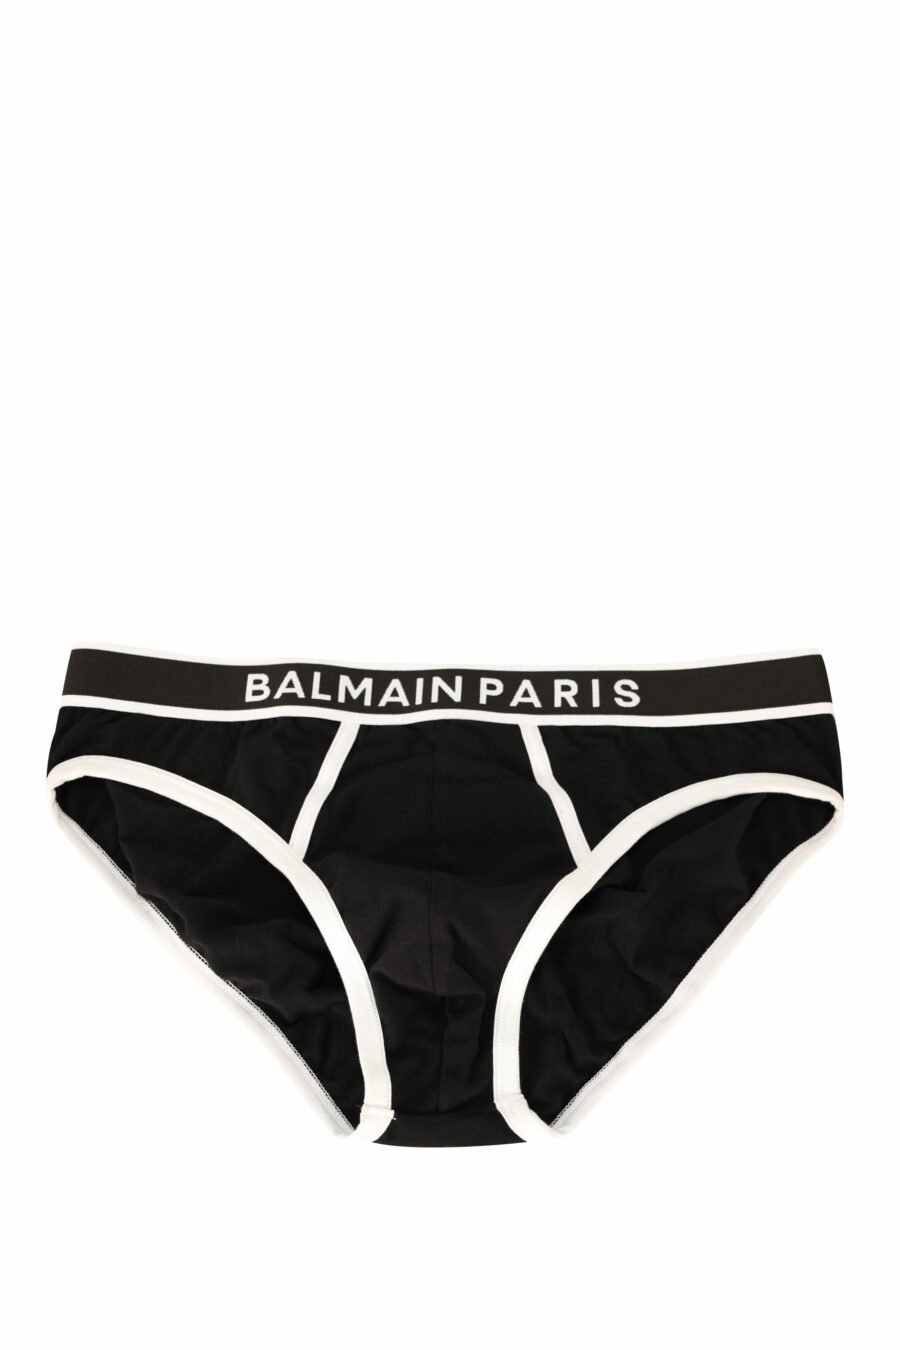 Black briefs with white line and logo - 8032674405272